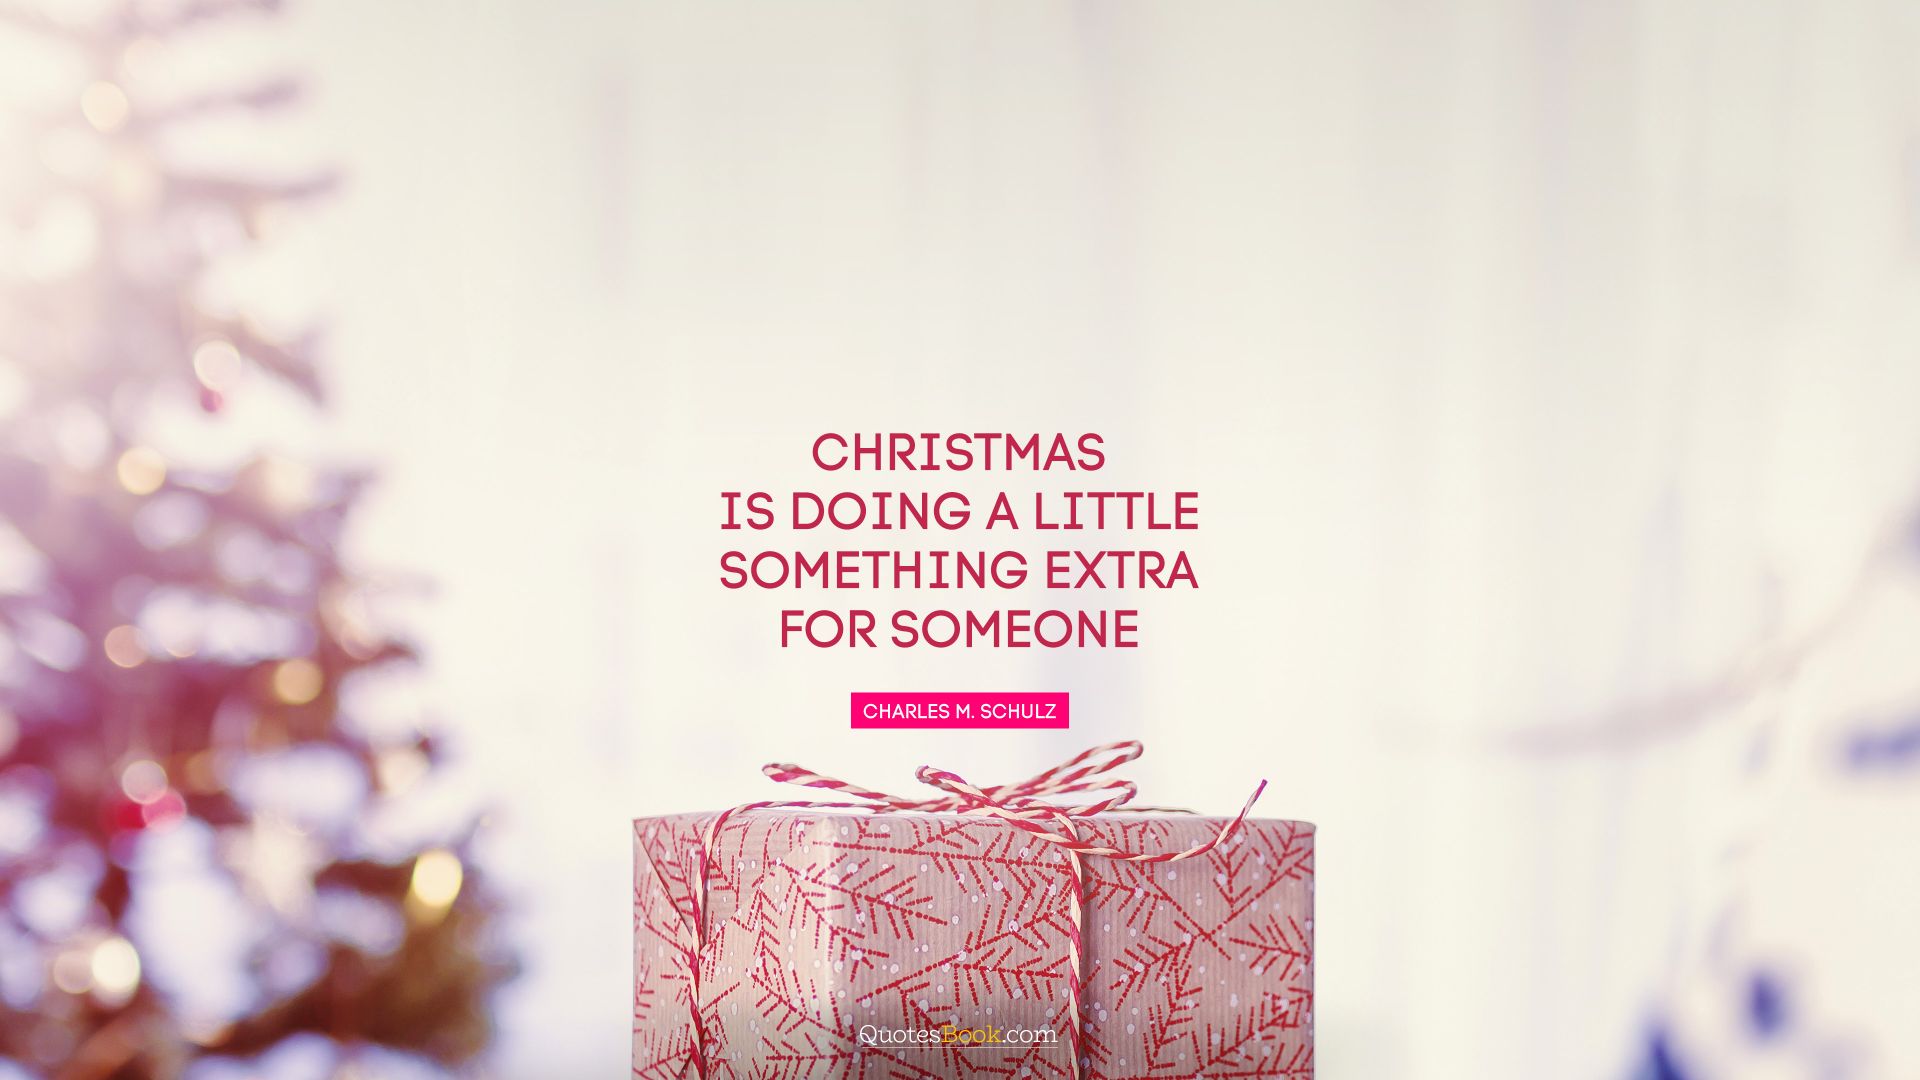 Christmas is doing a little something extra for someone. - Quote by Charles M. Schulz